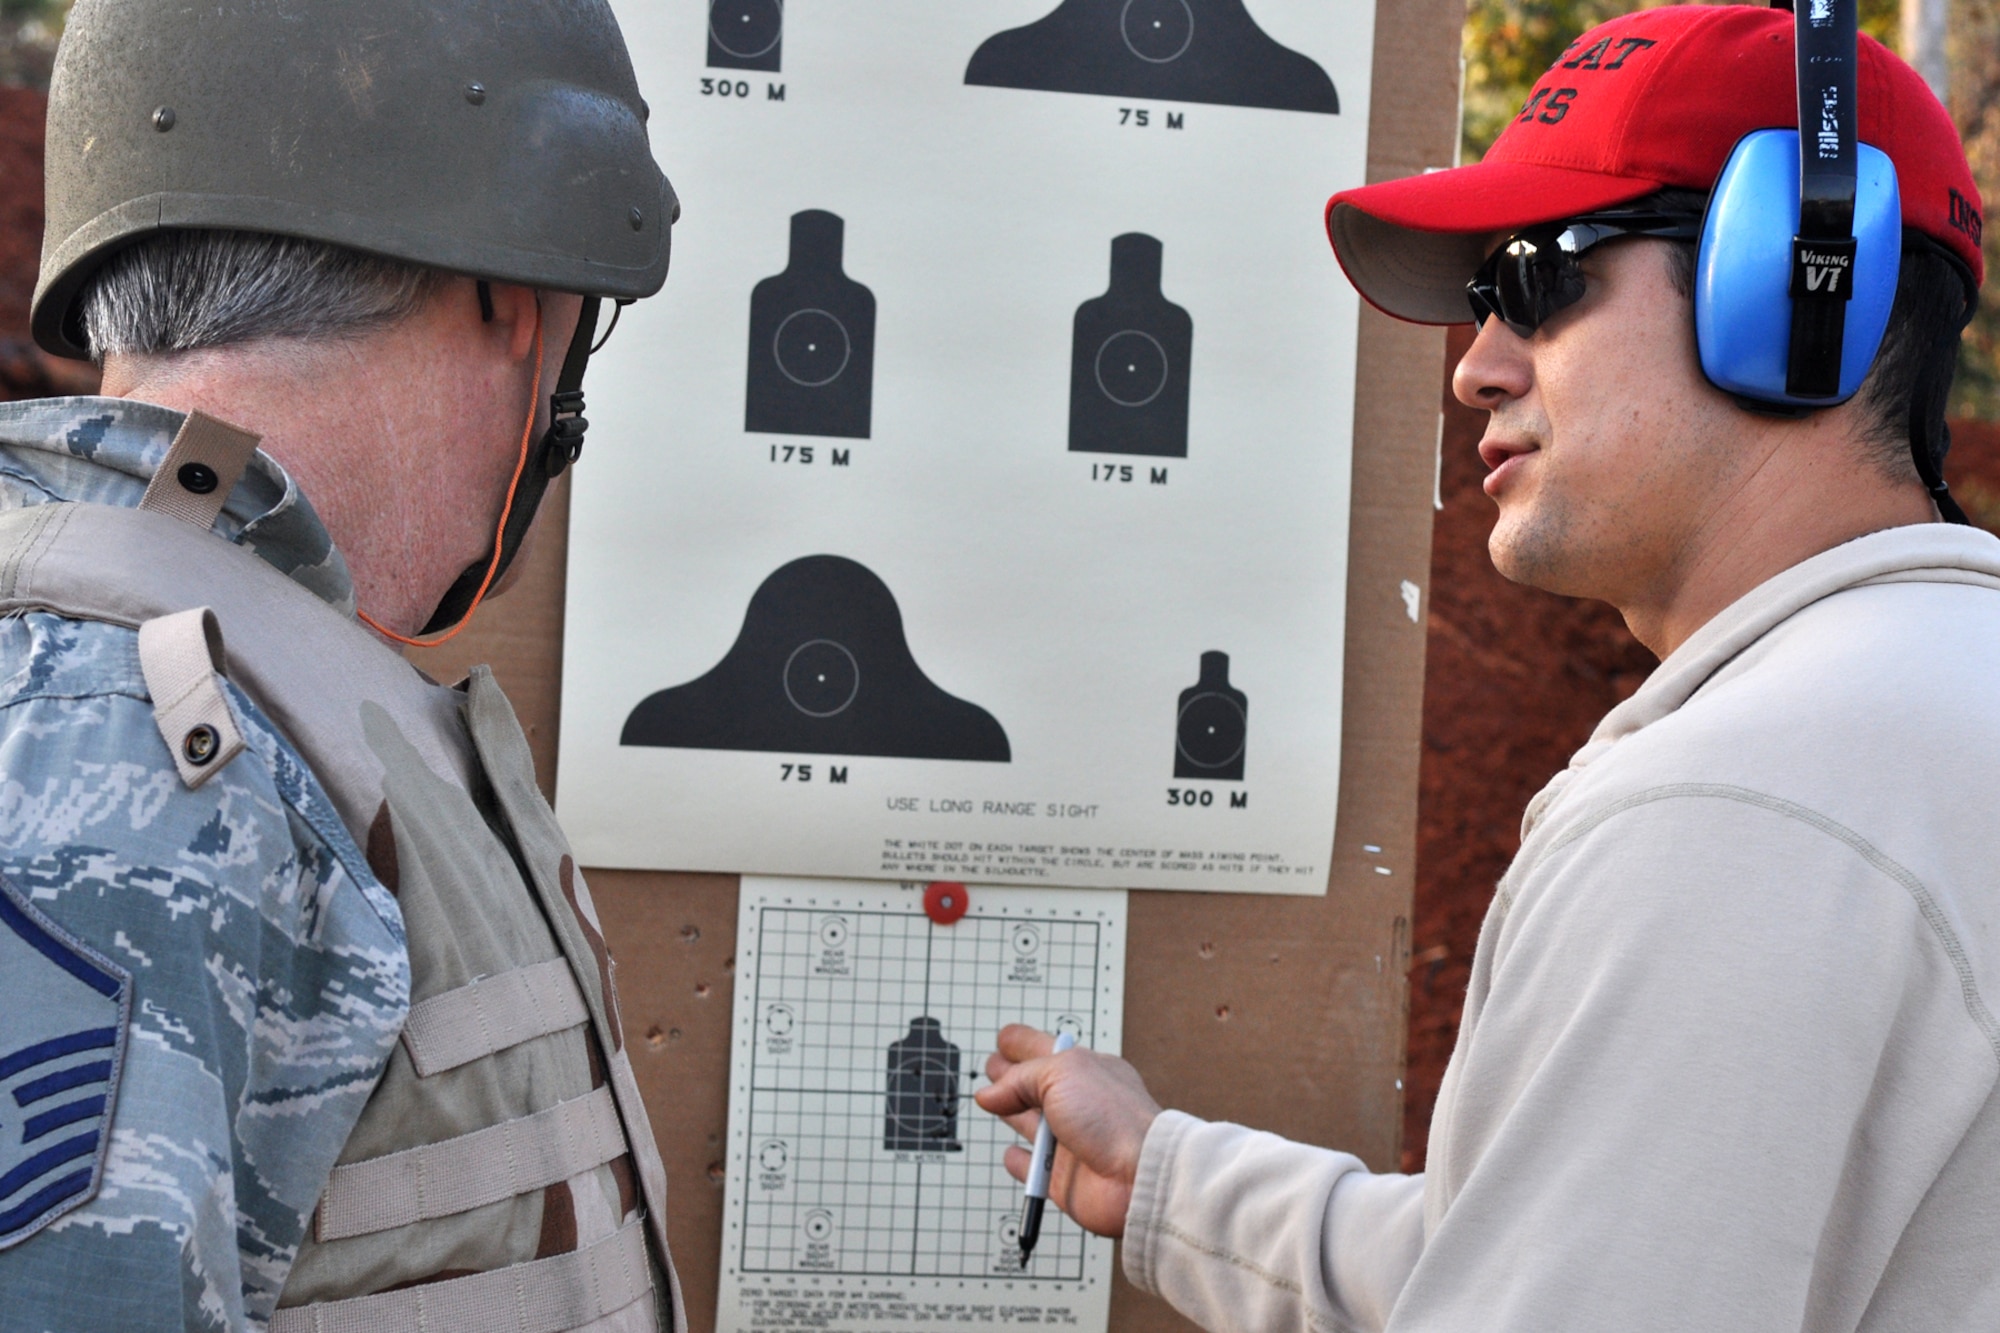 Staff Sgt. Josh Feliciano, who is a Combat Arms instructor assigned to the 307th Security Forces Squadron, tells Master Sgt. David Williford what a good grouping he has at a firing range near Barksdale Air Force Base, La., Nov. 3, 2012. Williford is a firefighter assigned to the 307th Civil Engineer Squadron. (U.S. Air Force photo by Master Sgt. Jeff Walston/Released) 